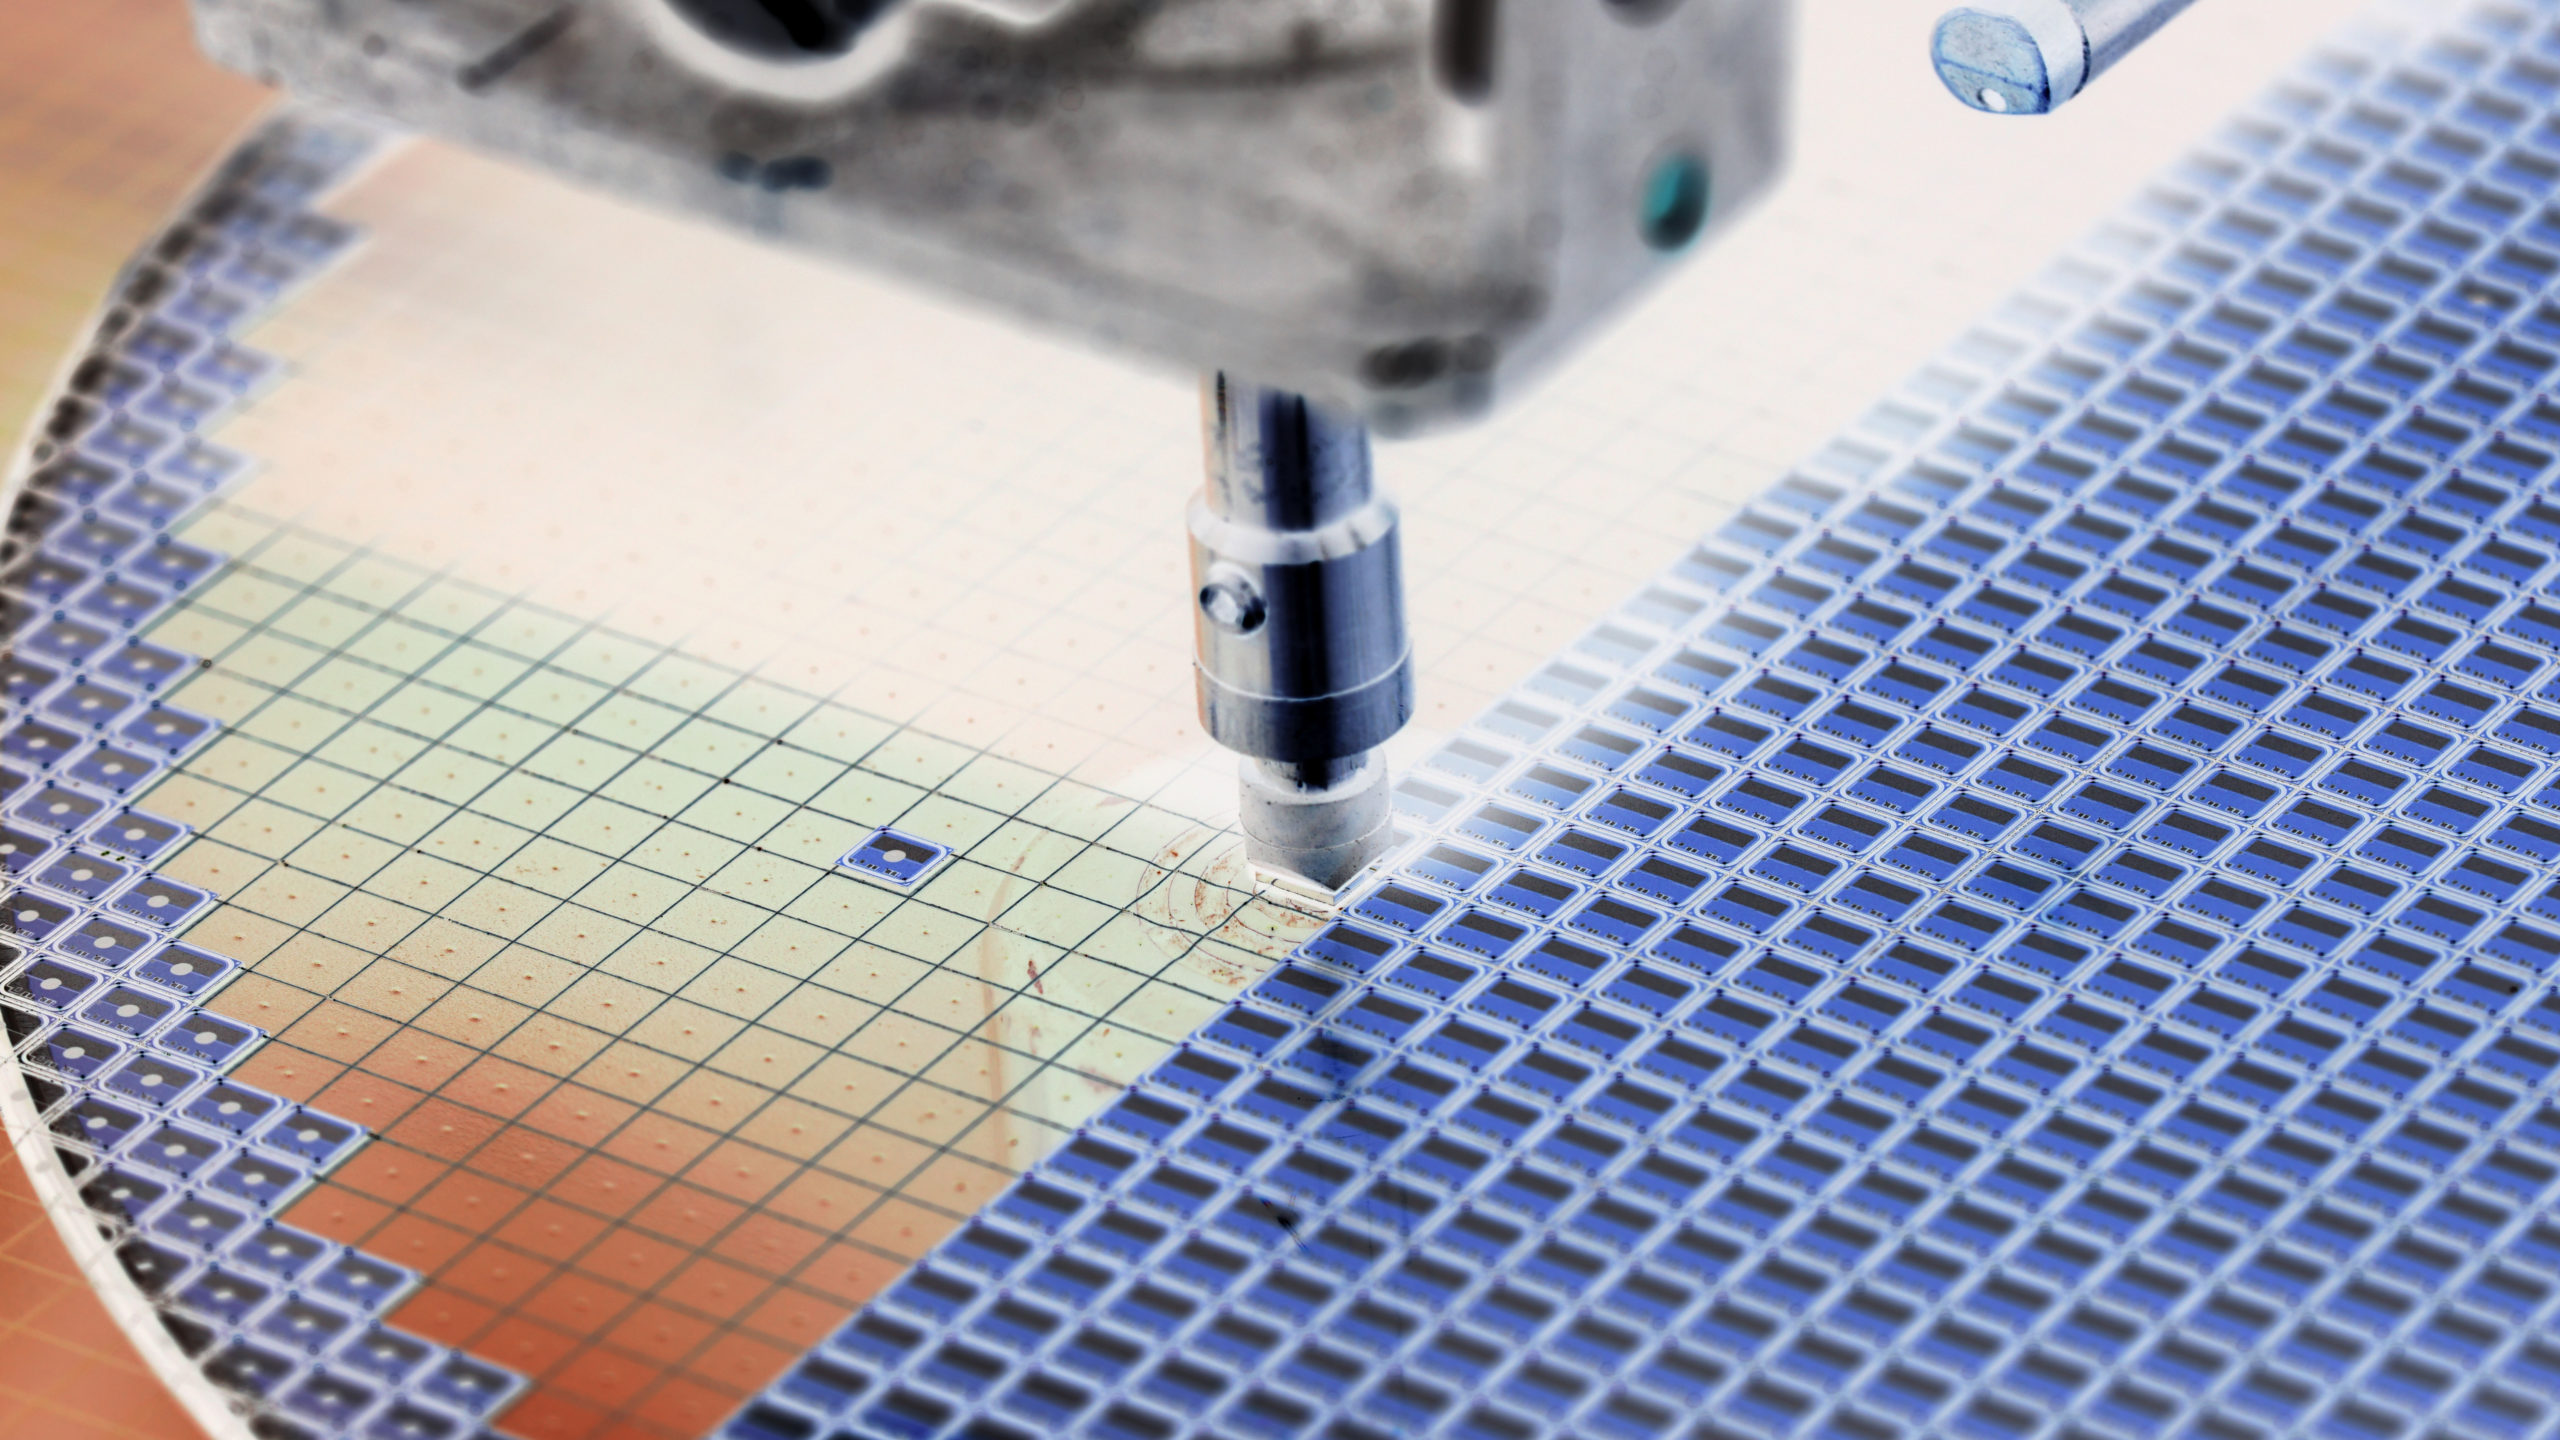 Silicon Wafer Manufacturing